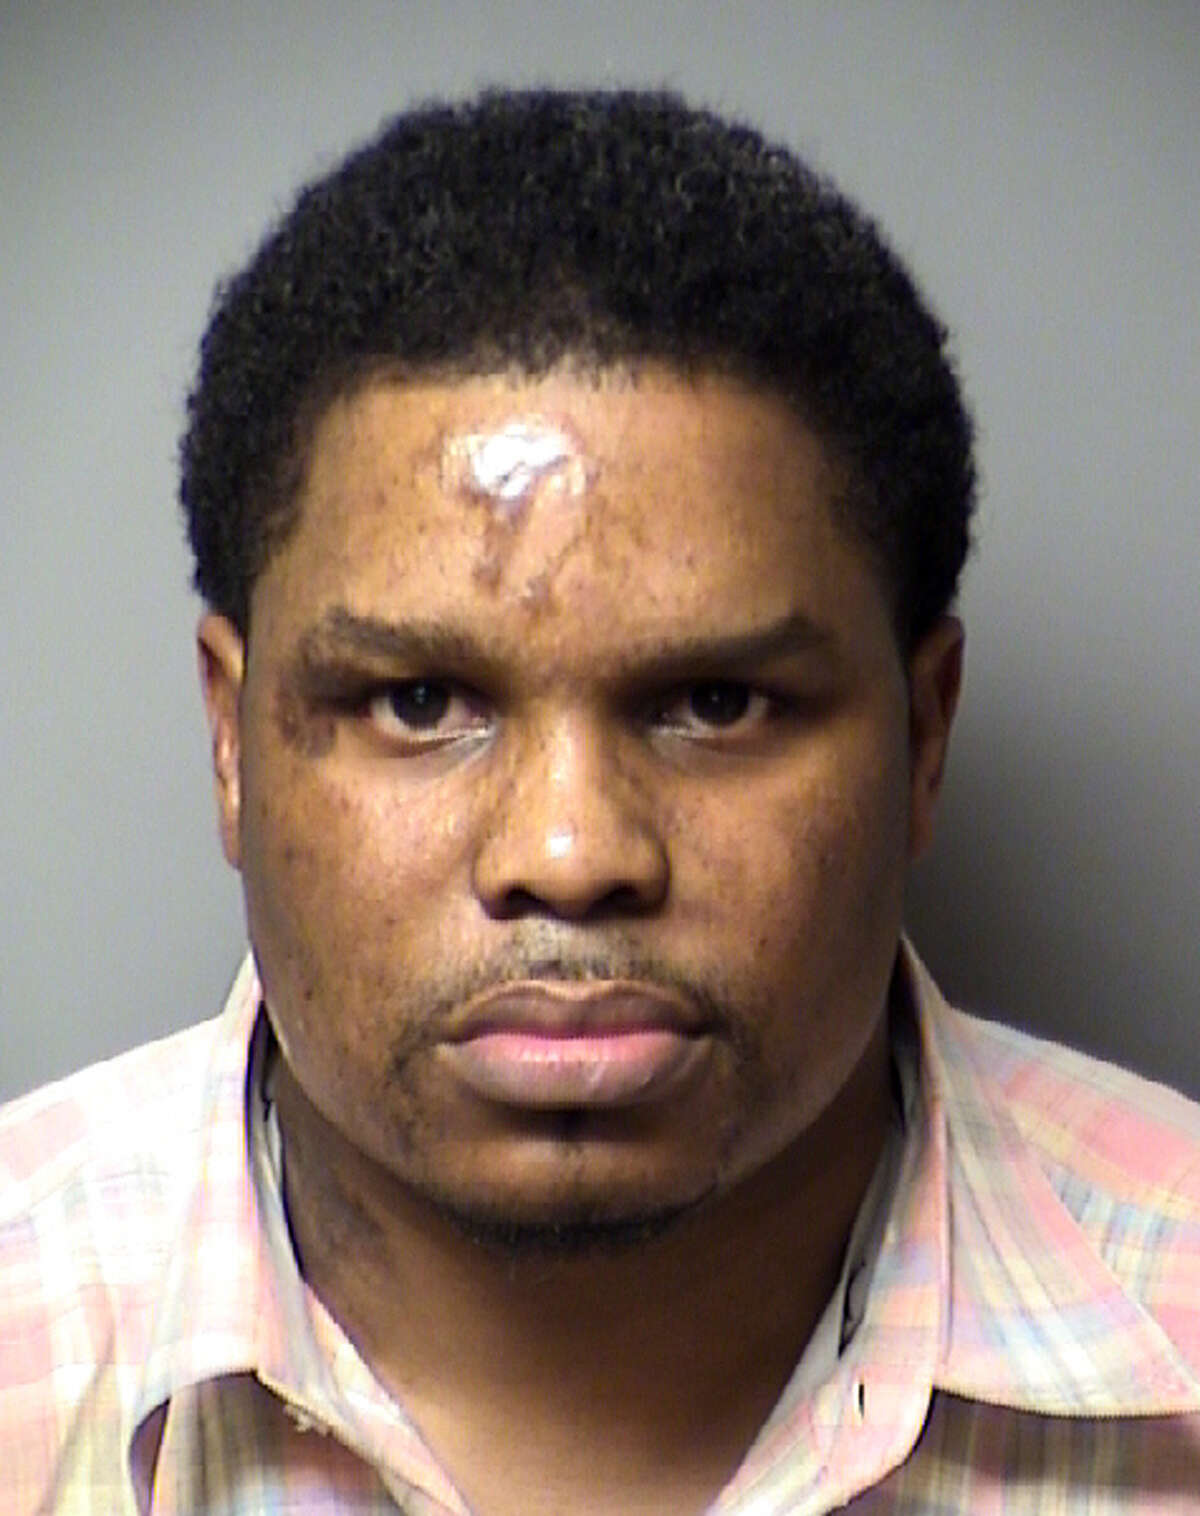 Anthony Lamont Thomas, 38, has been indicted in connection with the shooting death of a 29-year-old last summer.